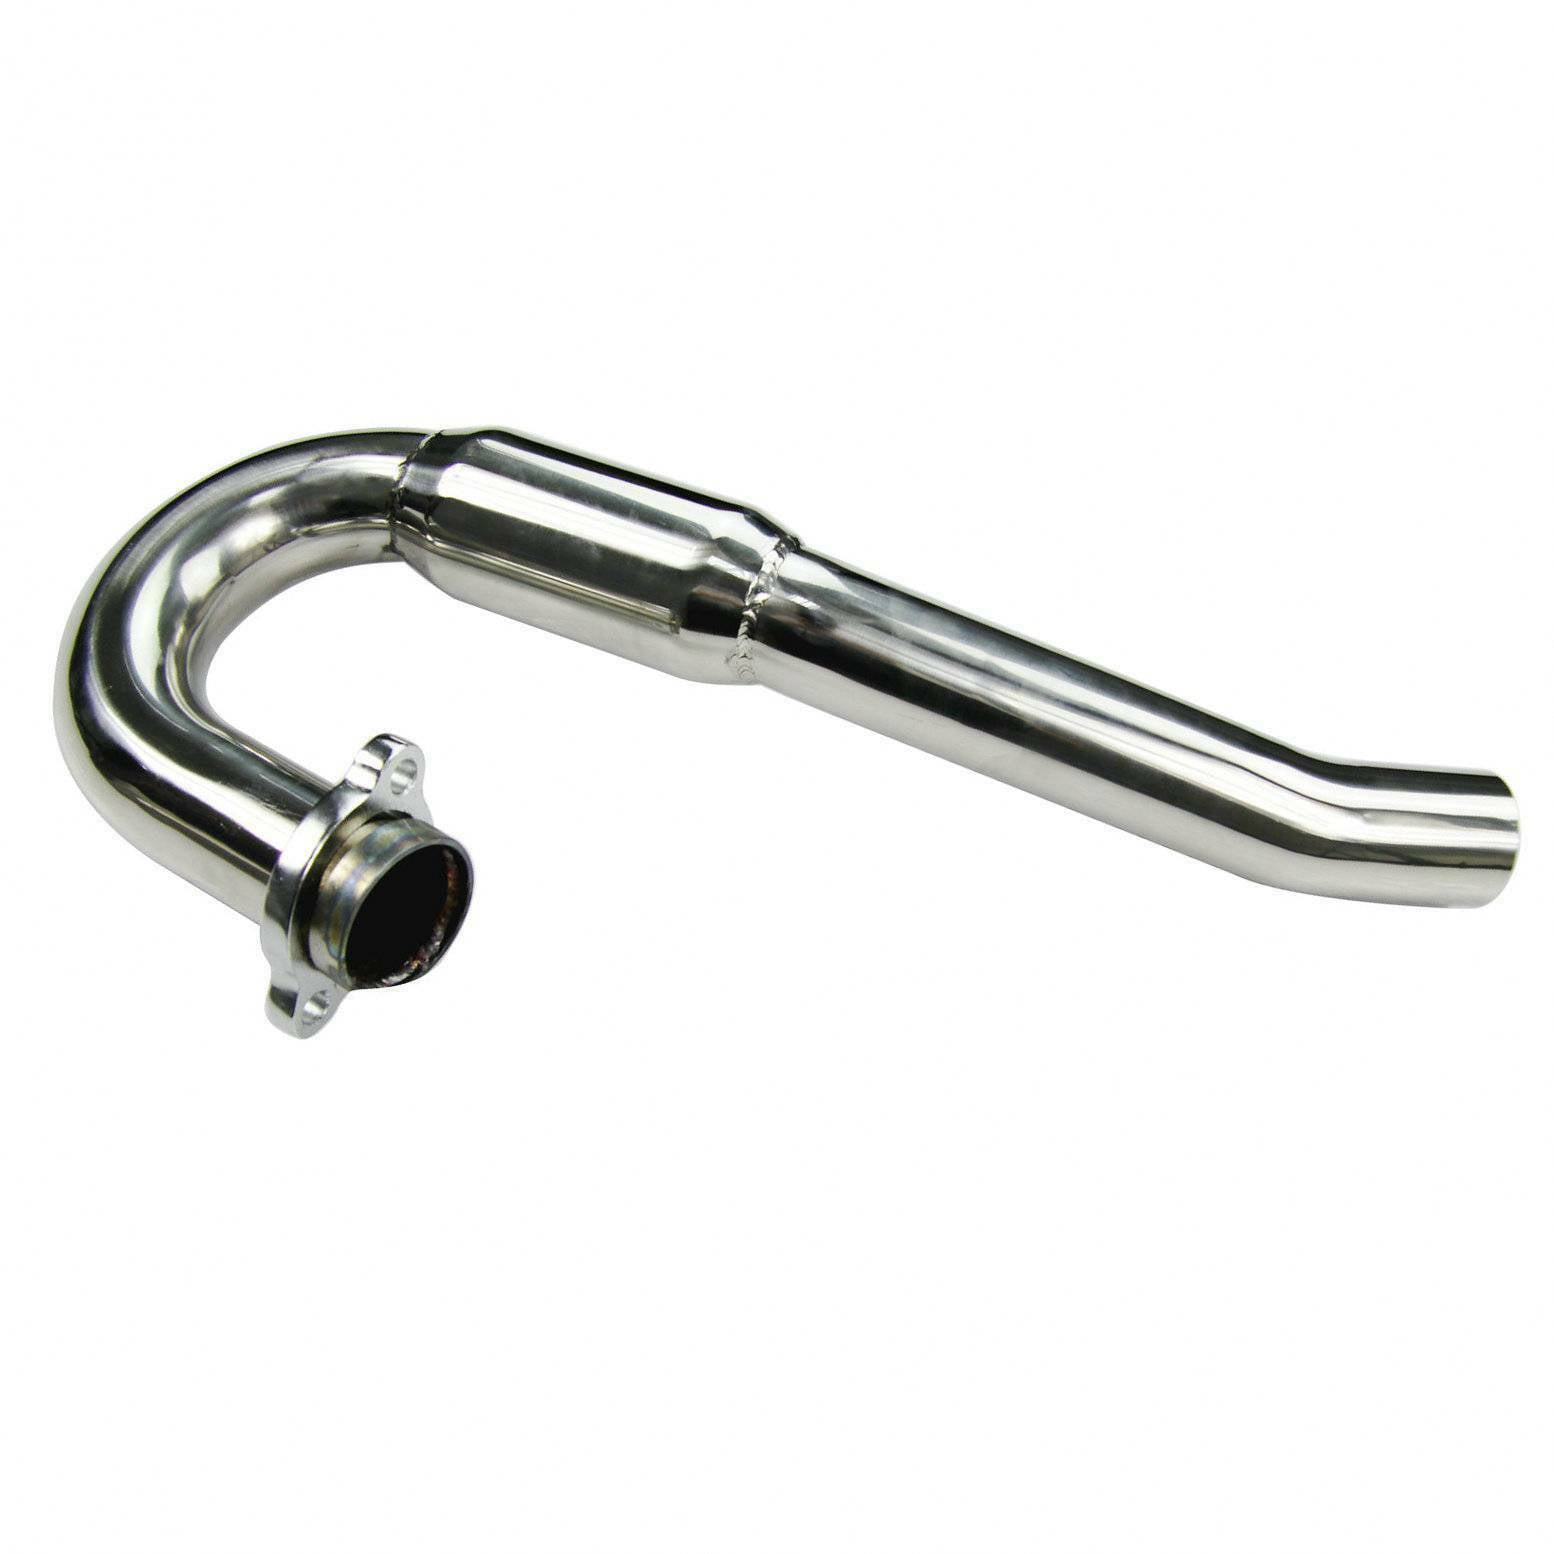 Stainless Exhaust Head Header Pipe Fit For Honda CRF450R CRF 450R 2006 2007